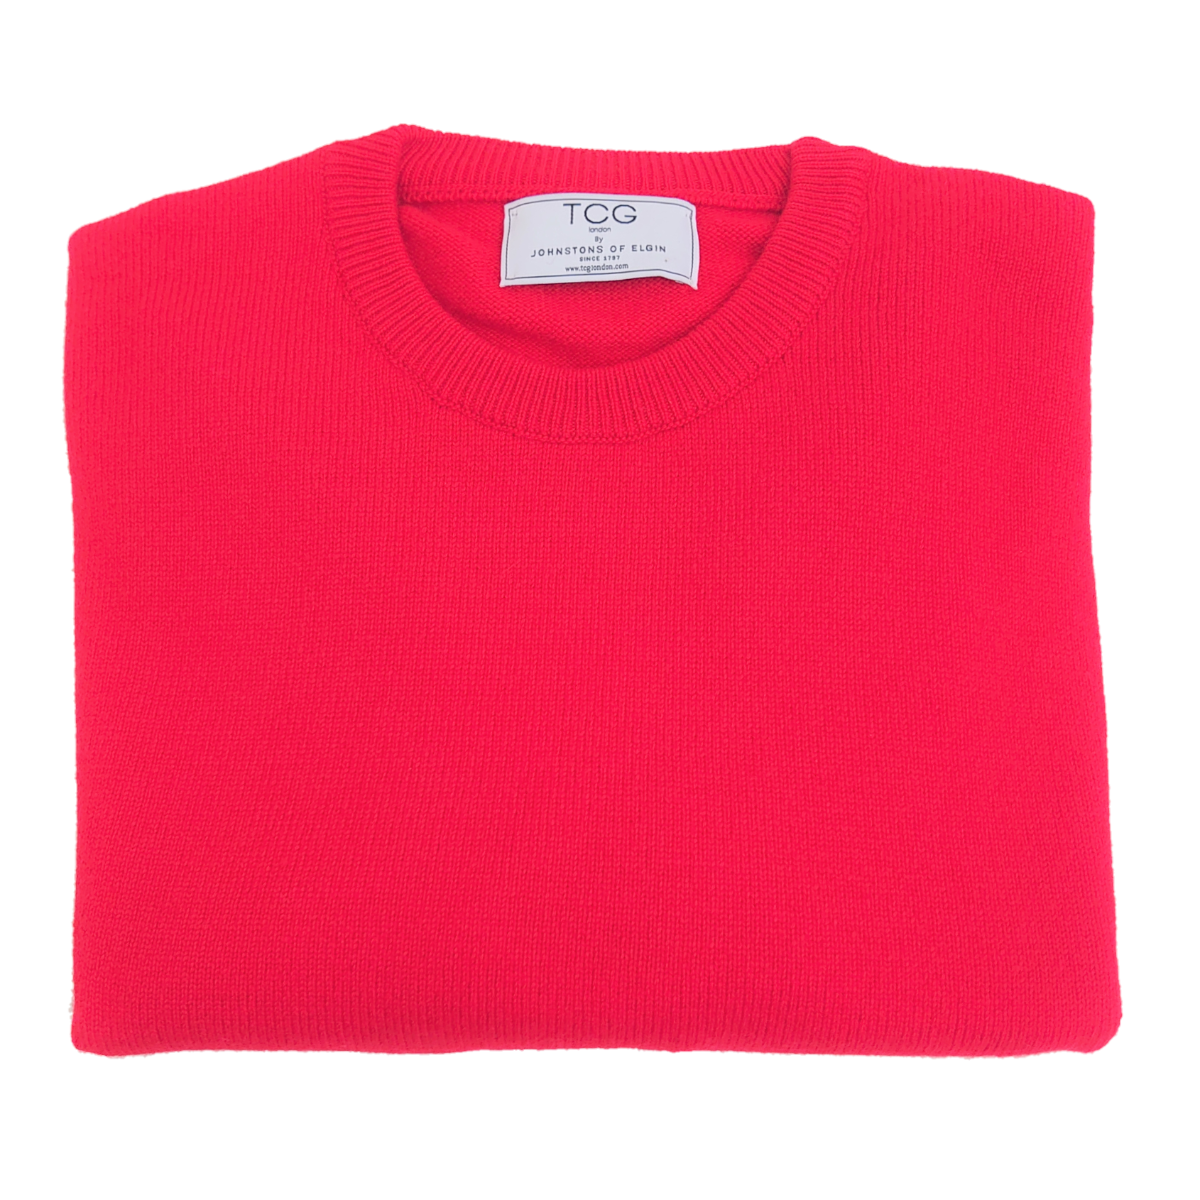 Men's Relaxed Fit Round Neck 100% Pure Cashmere Jumper - Red - S